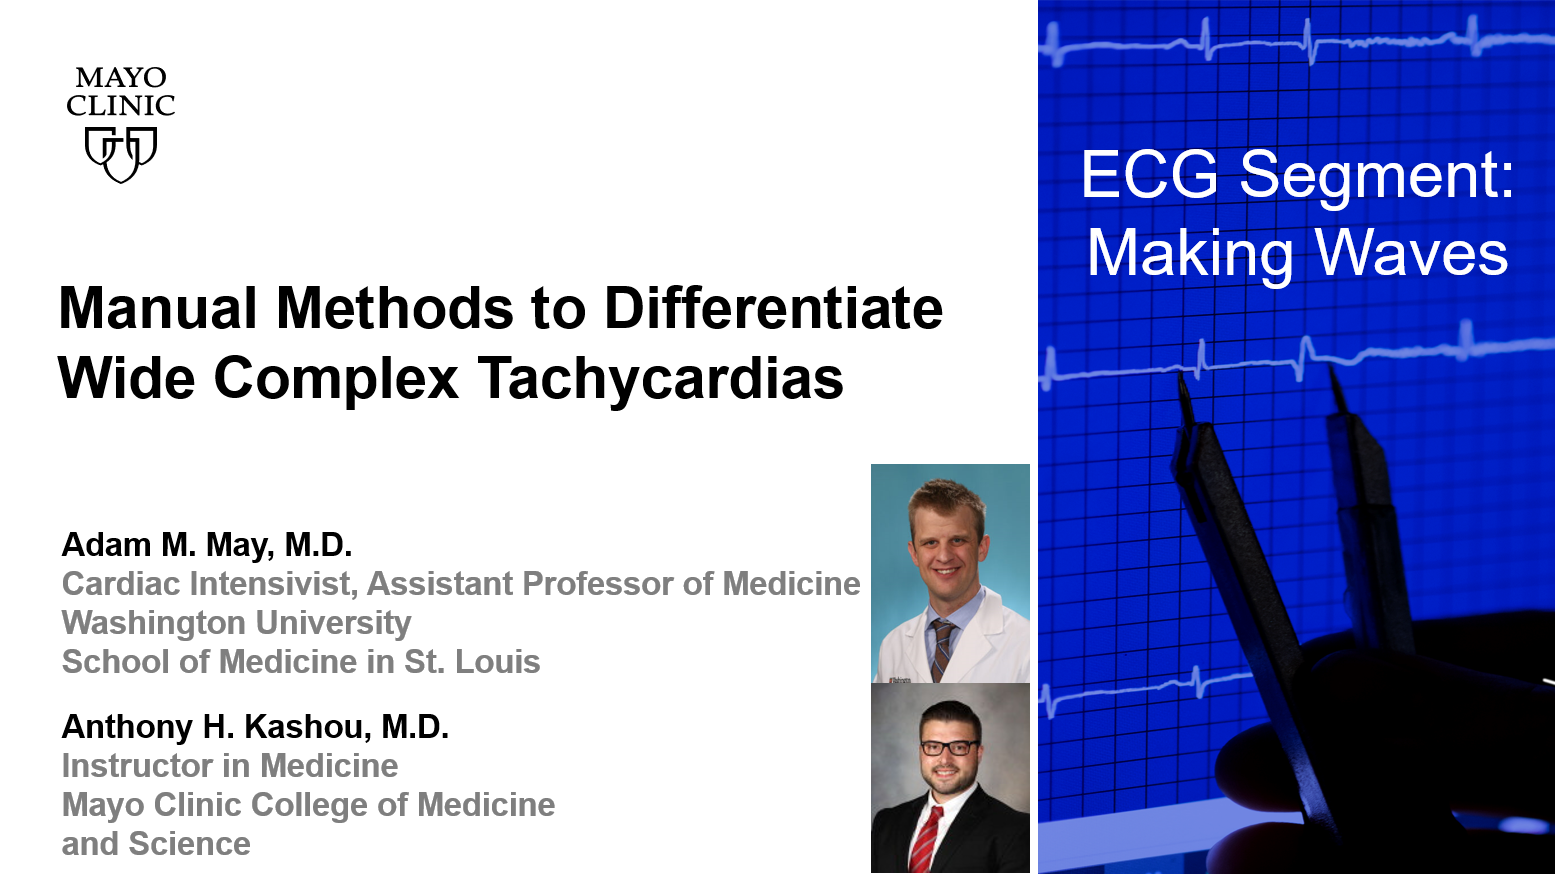 May kashou manual methods to differentiate wide complex tachycardias